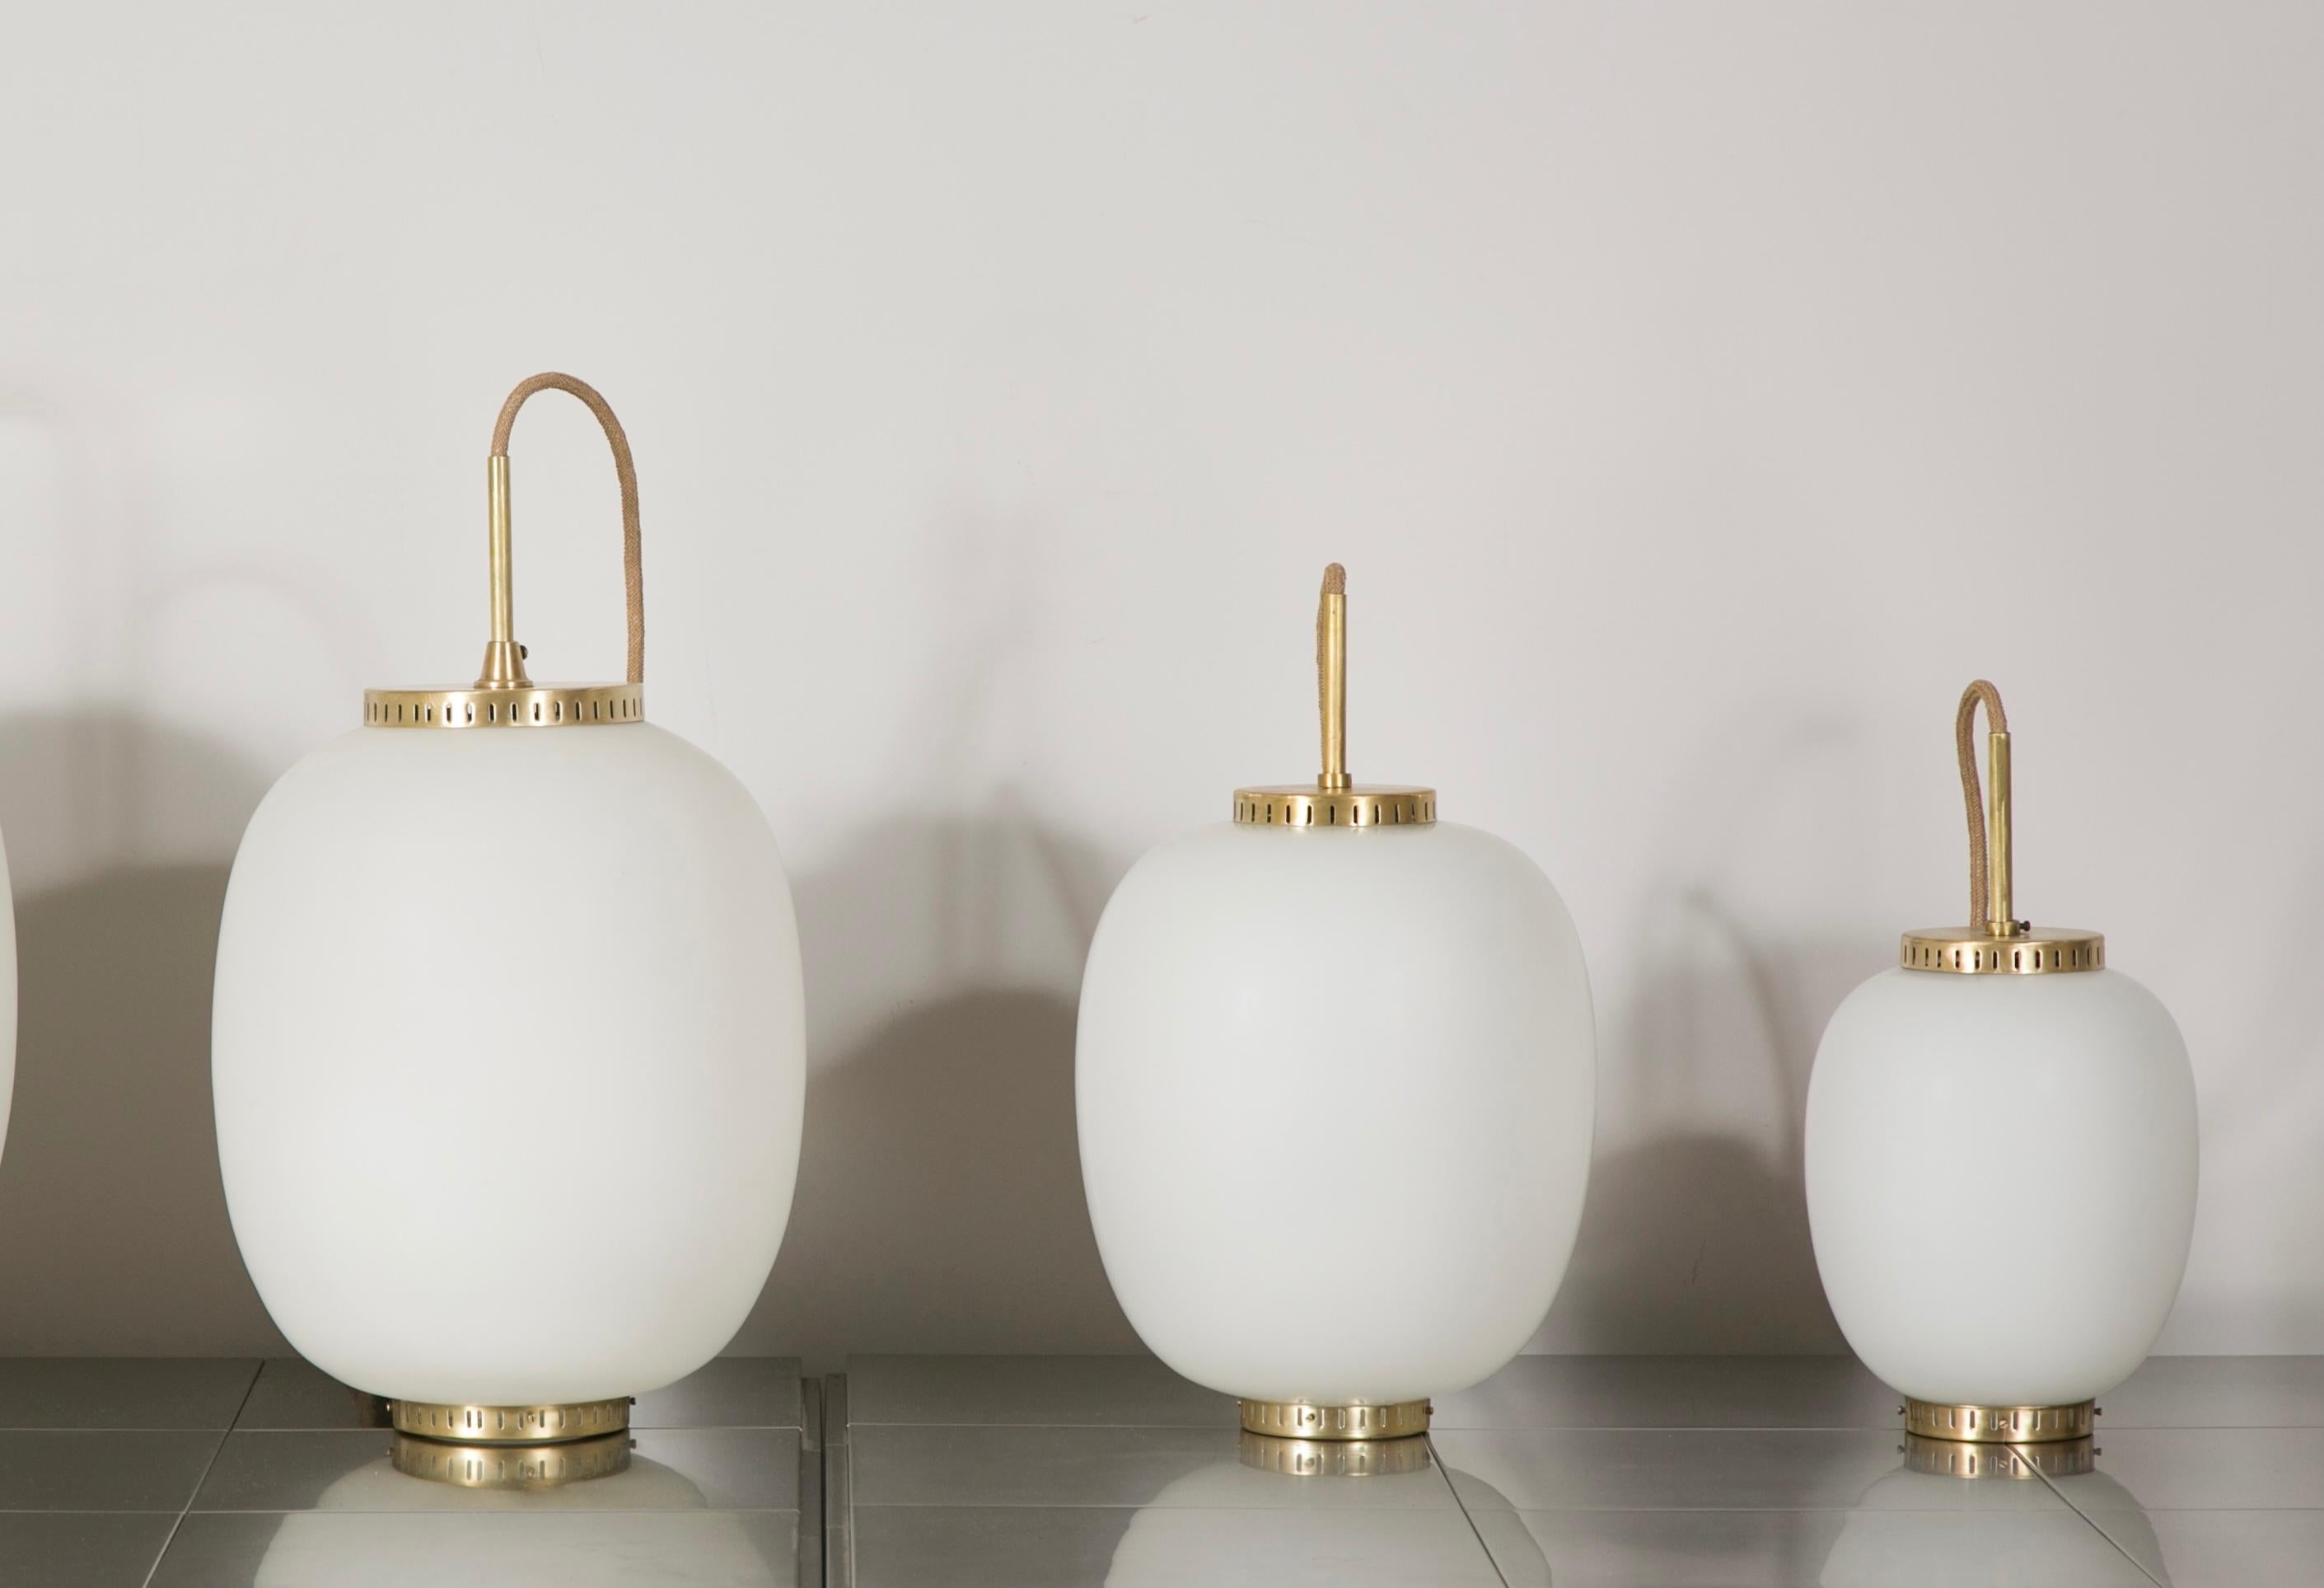 Collection of 10 opaline glass and brass ceiling fixtures.
See dimensions below
Designed by Bent Karlby for Lyfa.
Denmark, late 1950s.

Please note that this set of ceiling fixtures corresponds to the three items on the on last photo: Left (